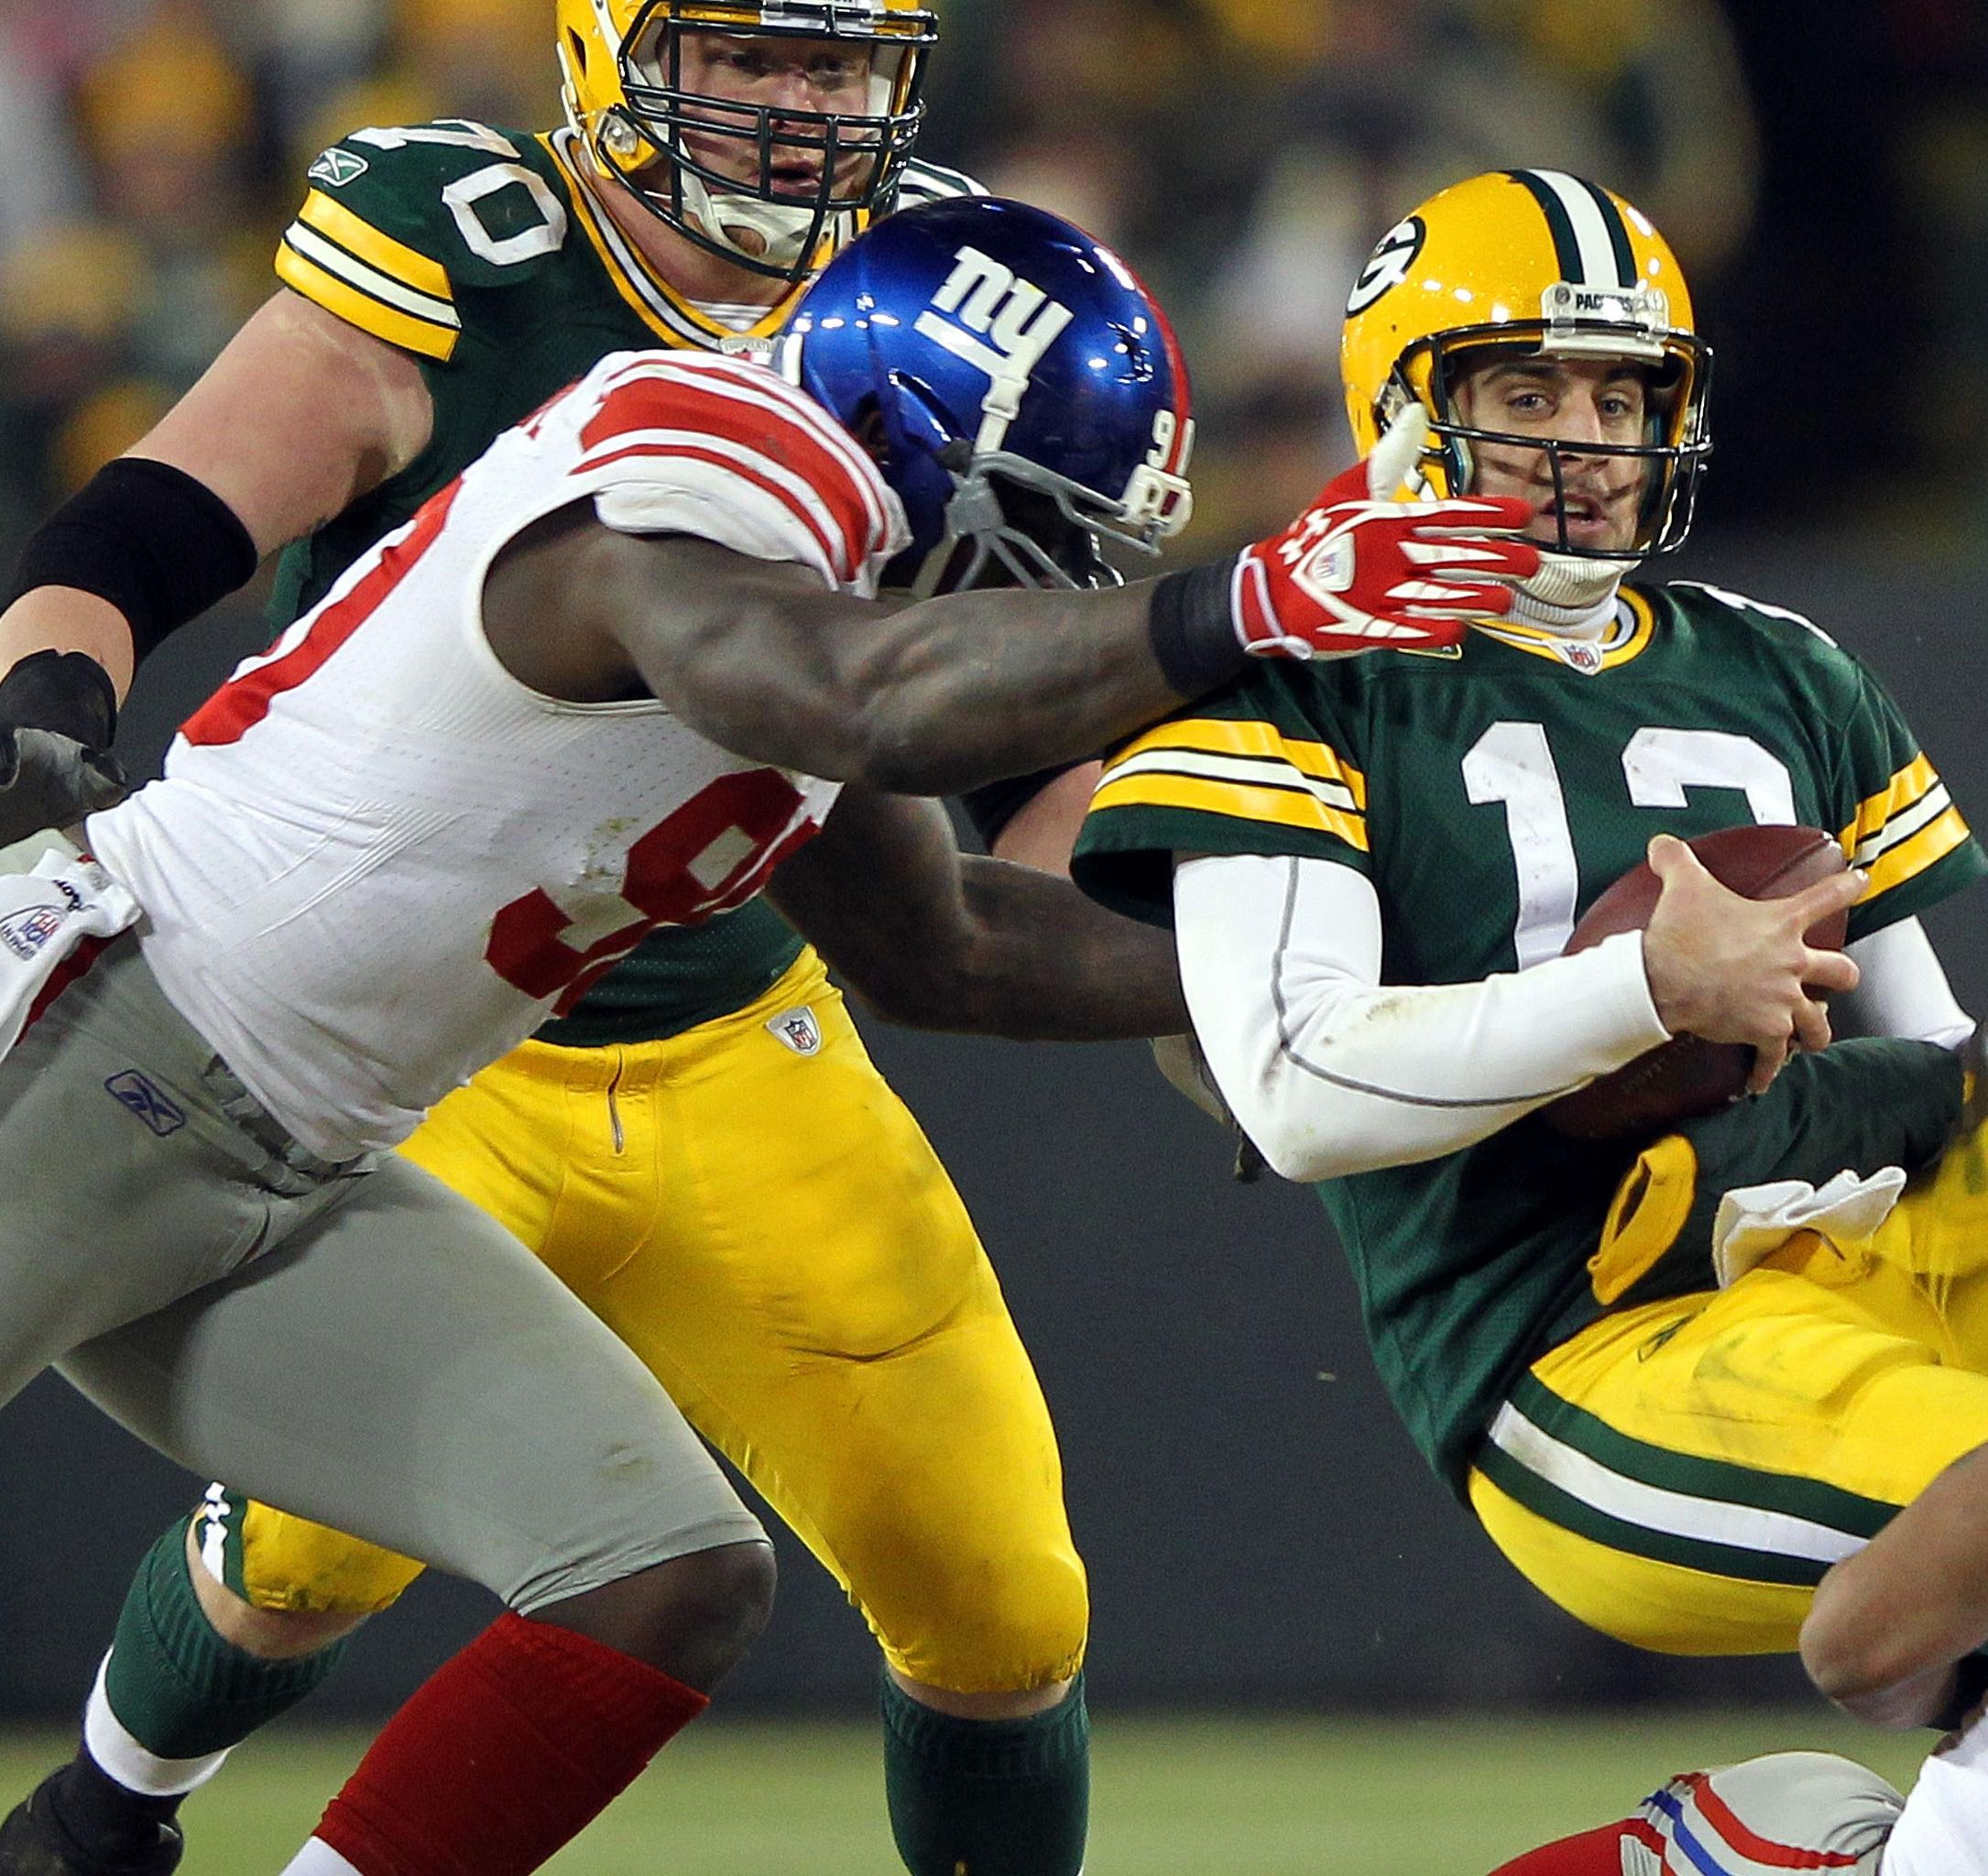 Giants Bare Their Chests and Get Exposed by the Packers - The New York Times